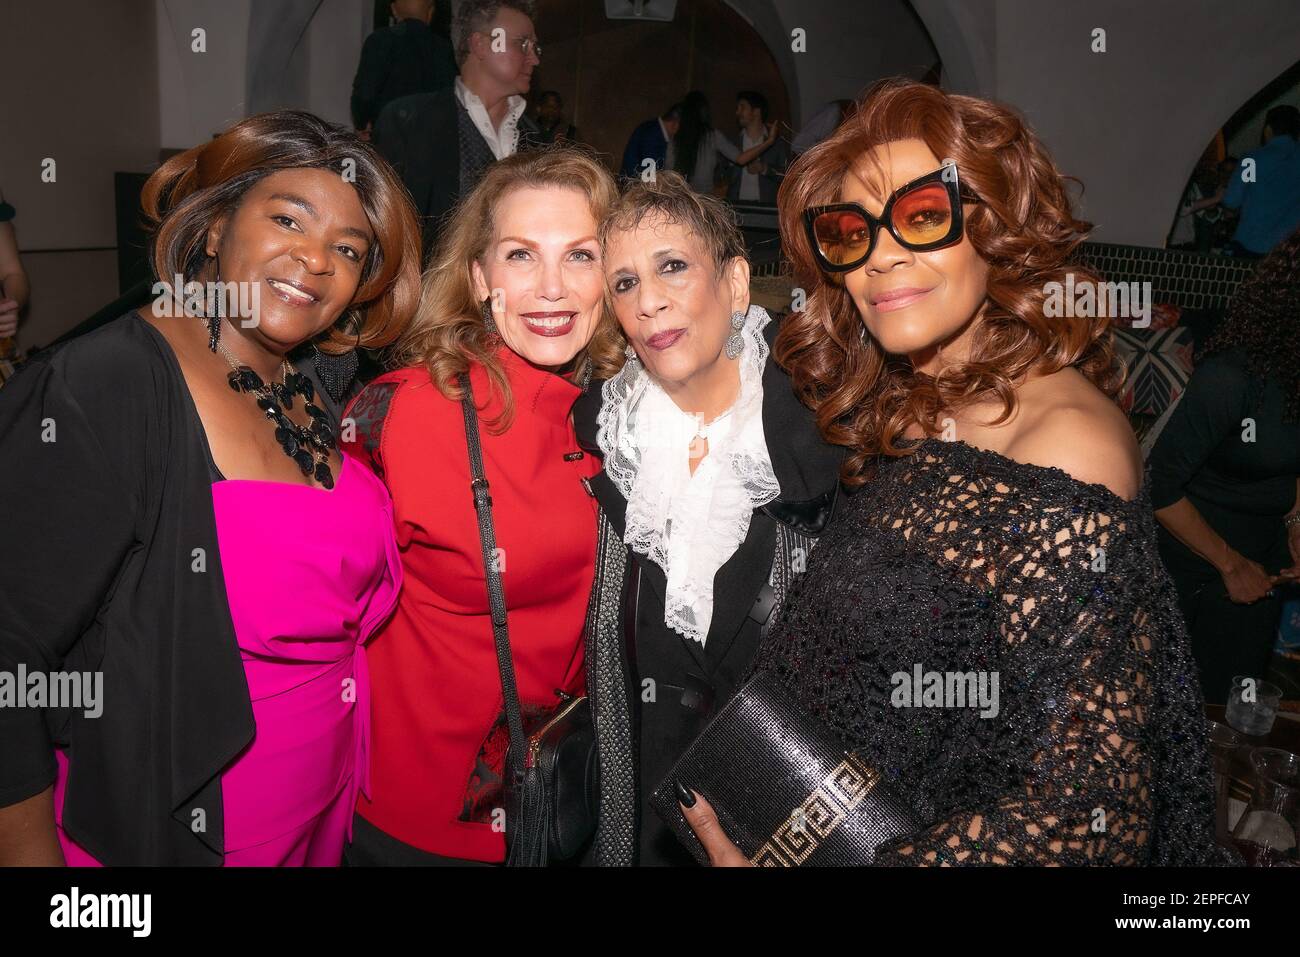 Cassandra Tindal, Denose Pereau, Lucia Kaiser and Stephanie celebrate Lucia Kaiser's birthday at Celon at the Bryant Park Hotel in New York, NY on December 13, 2019. (Photo by David Warren /Sipa? USA) Stock Photo